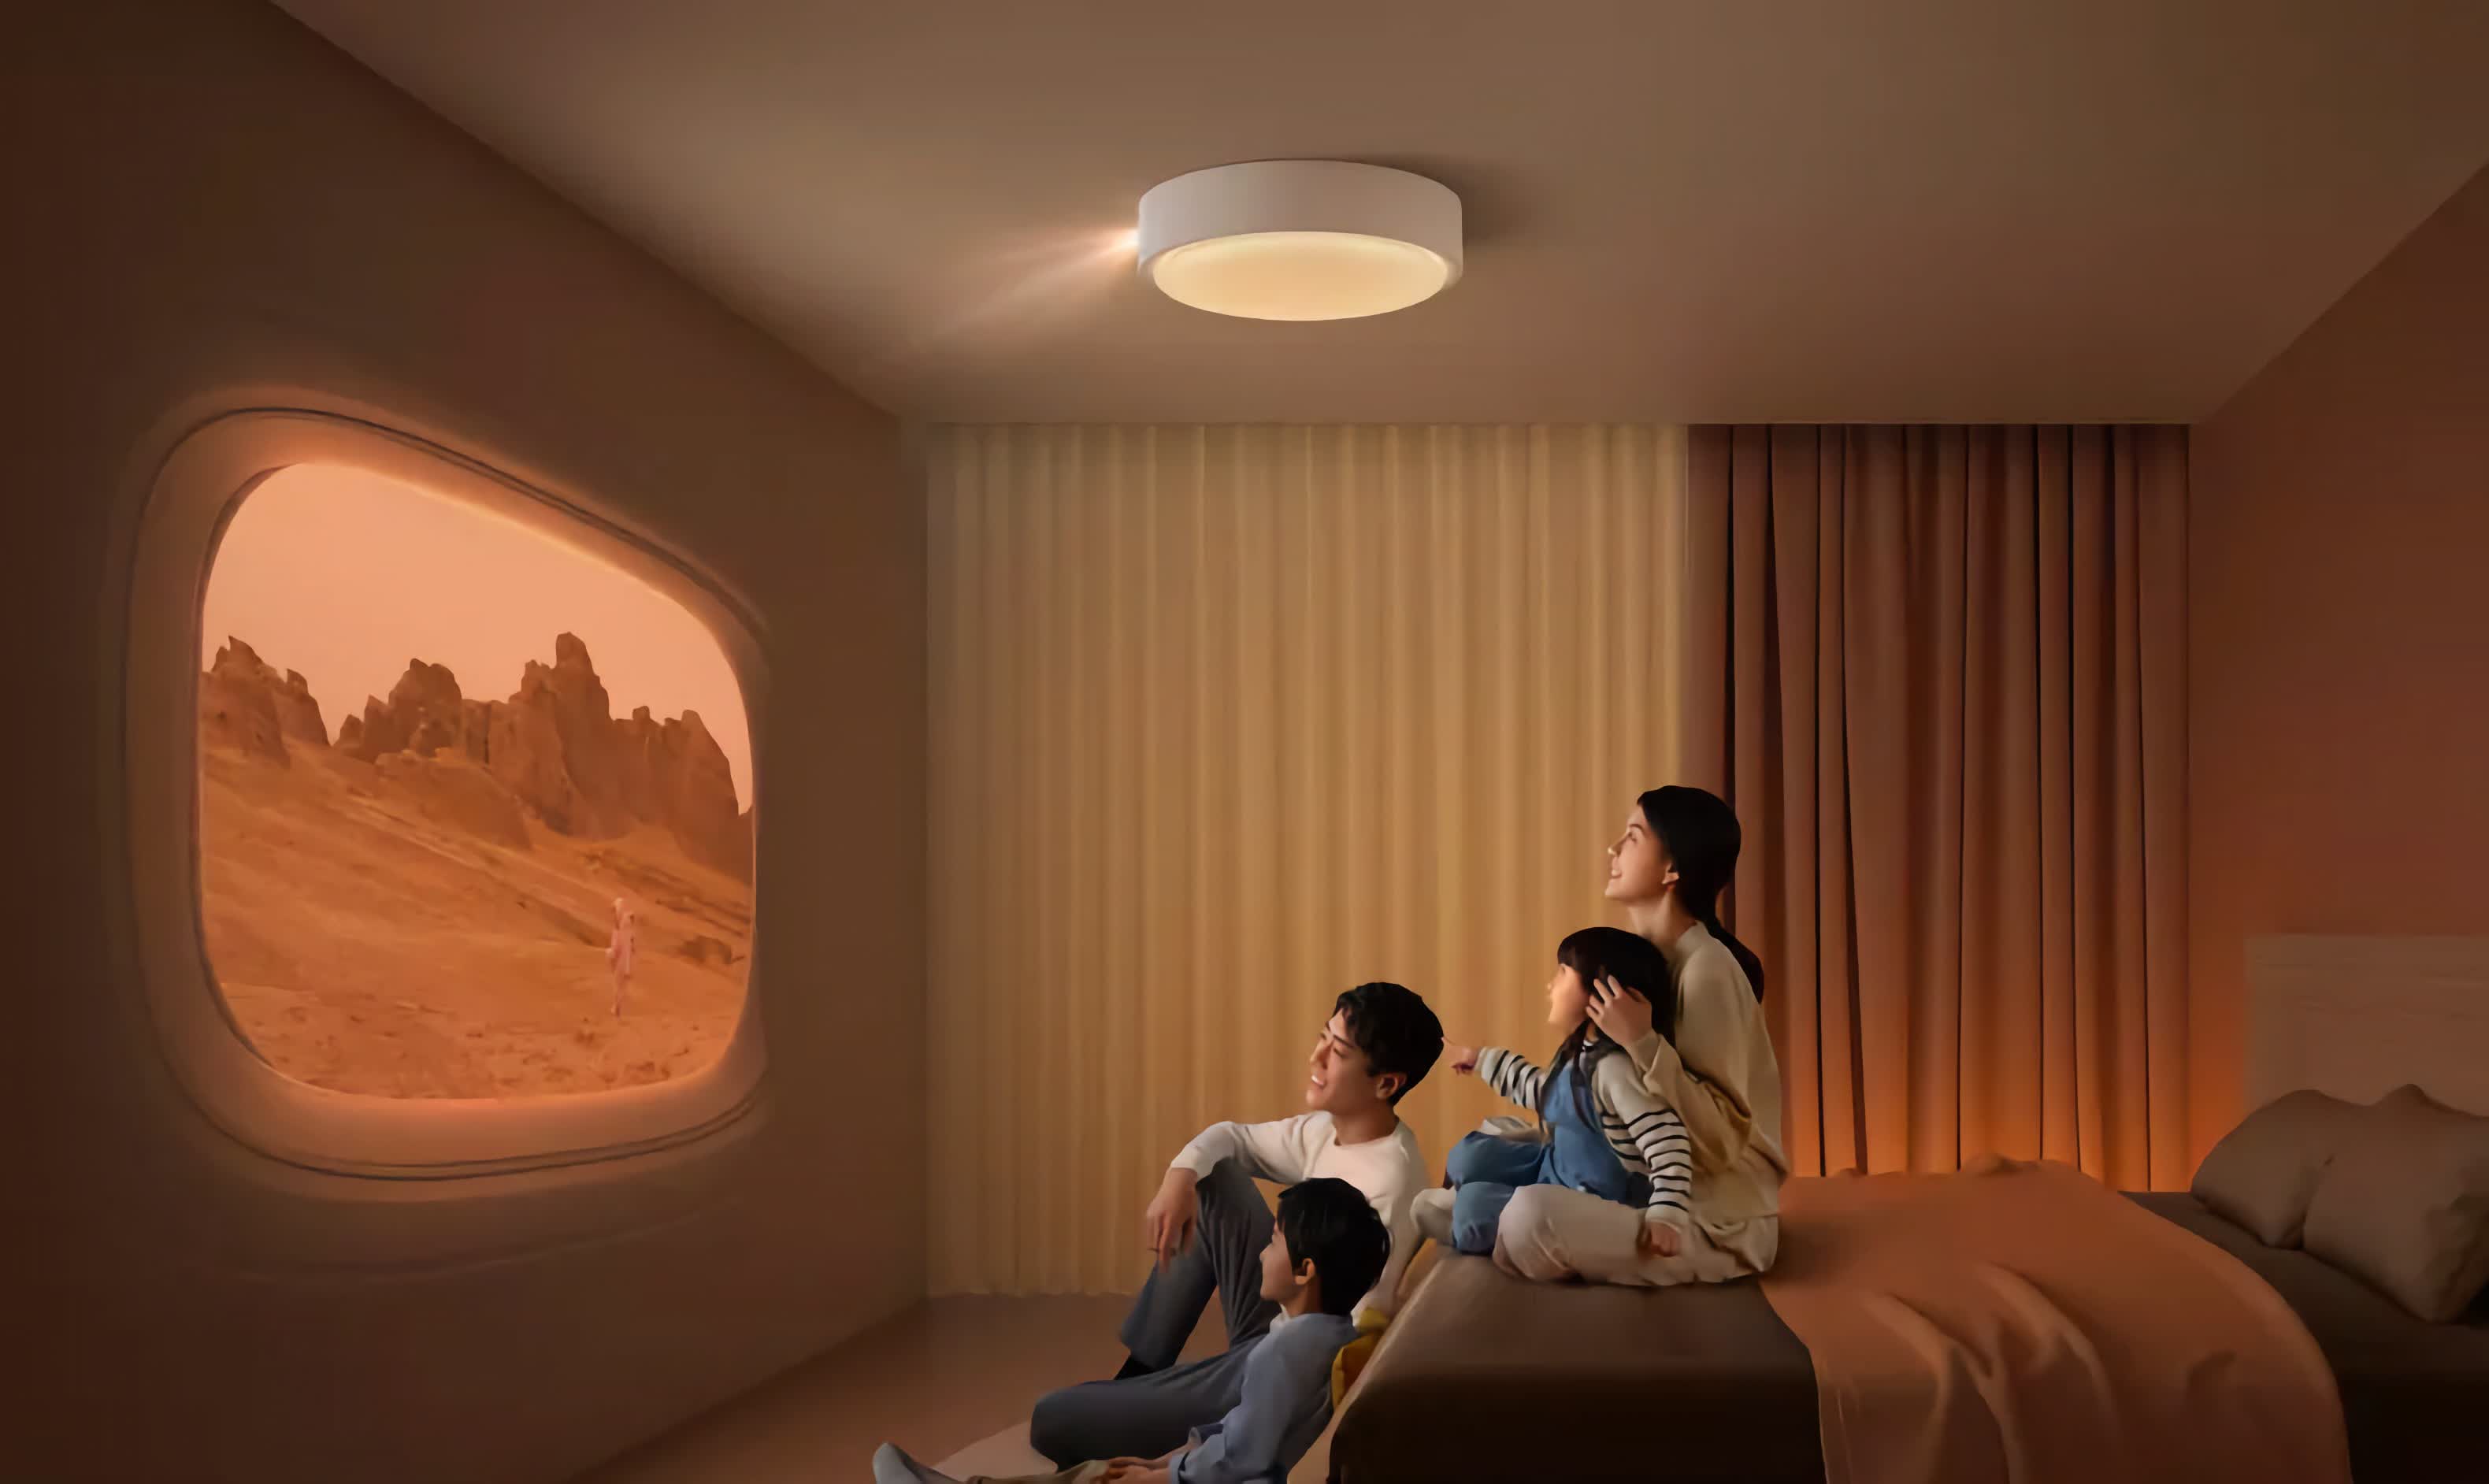 Xgimi shows off projector that doubles as a ceiling light, also a $3,000 IMAX-certified model